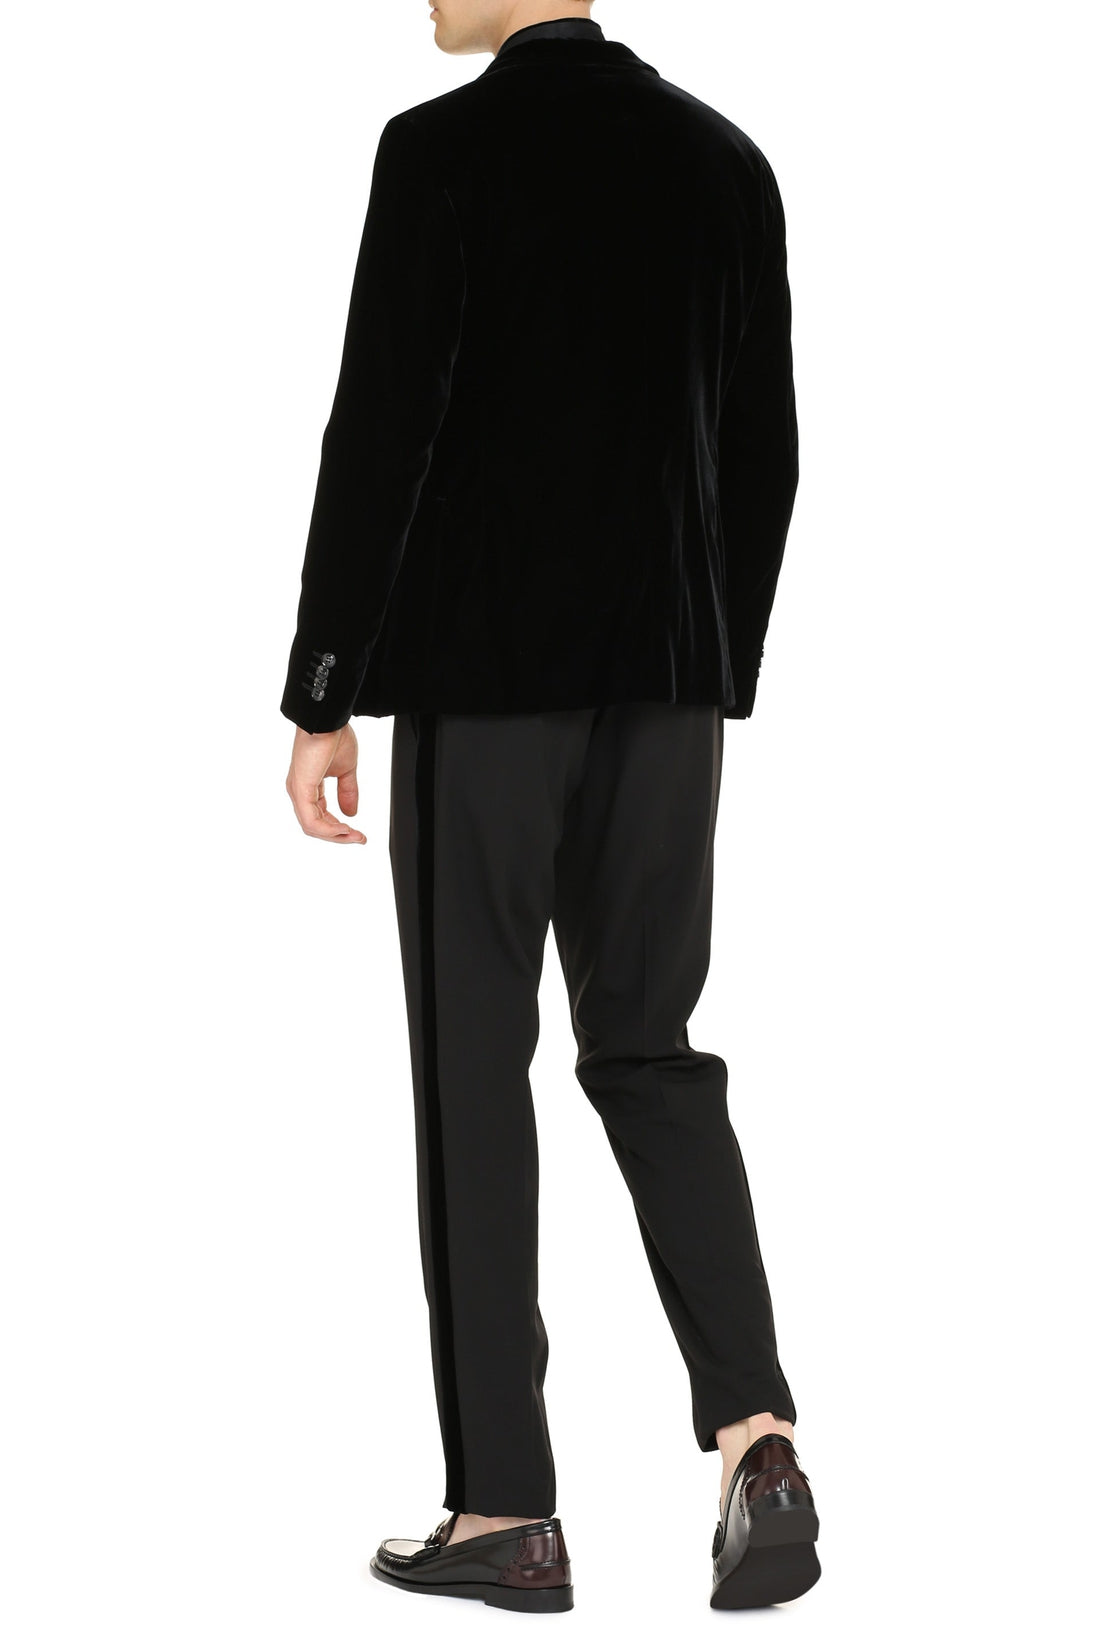 Giorgio Armani-OUTLET-SALE-Virgin wool tailored trousers-ARCHIVIST